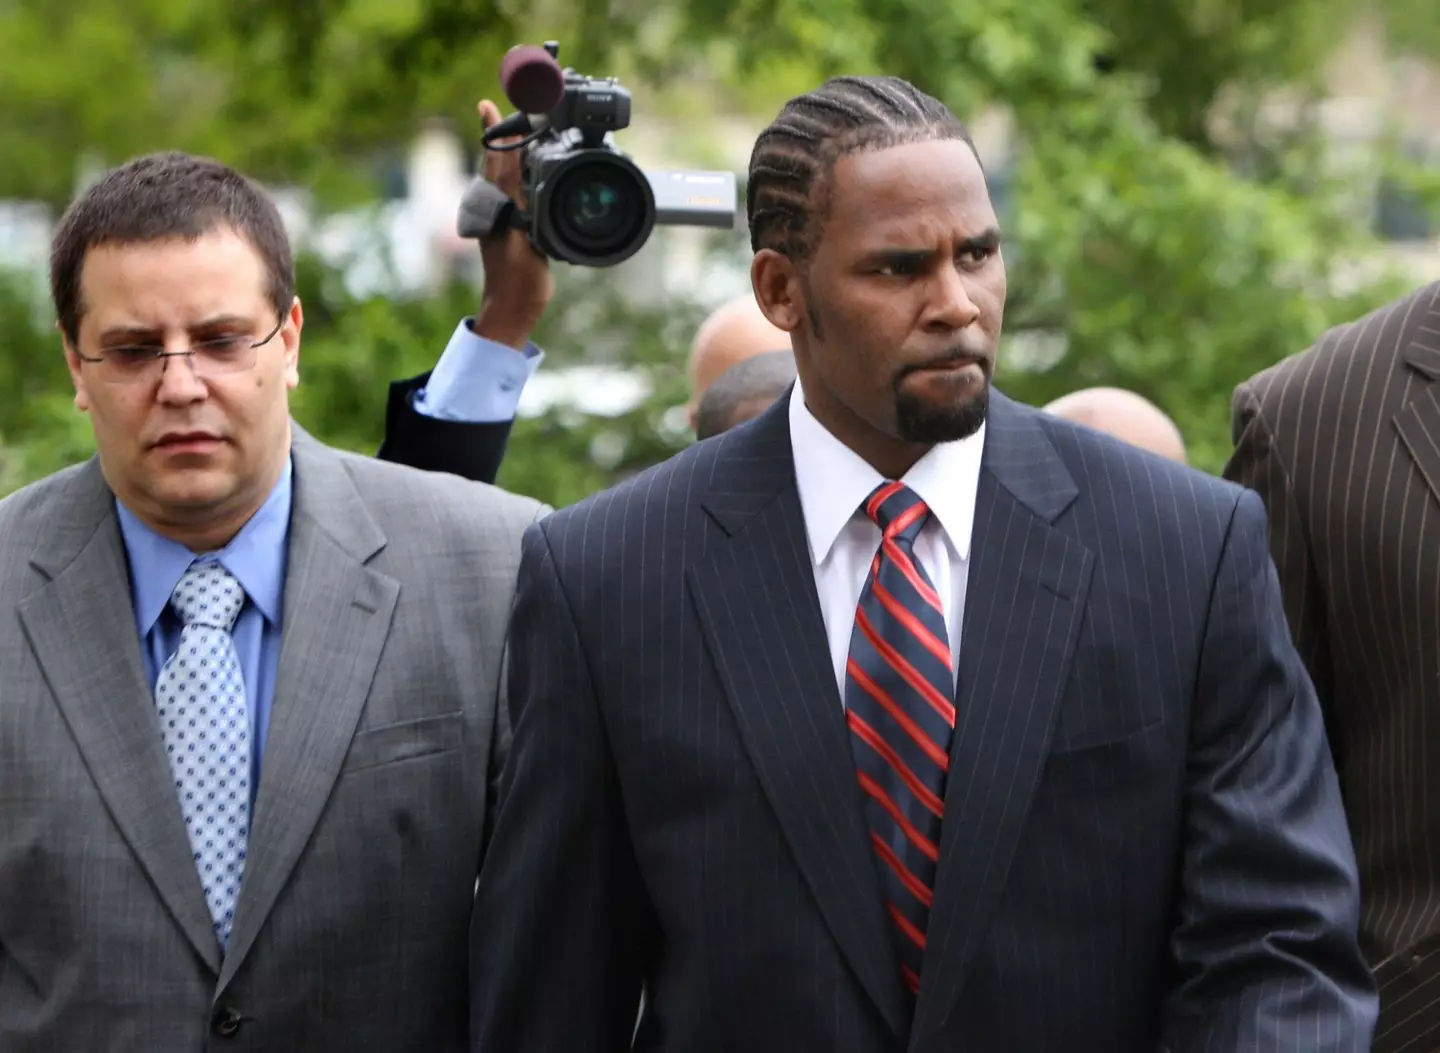 R Kelly has been sentenced to 30 years behind bars.